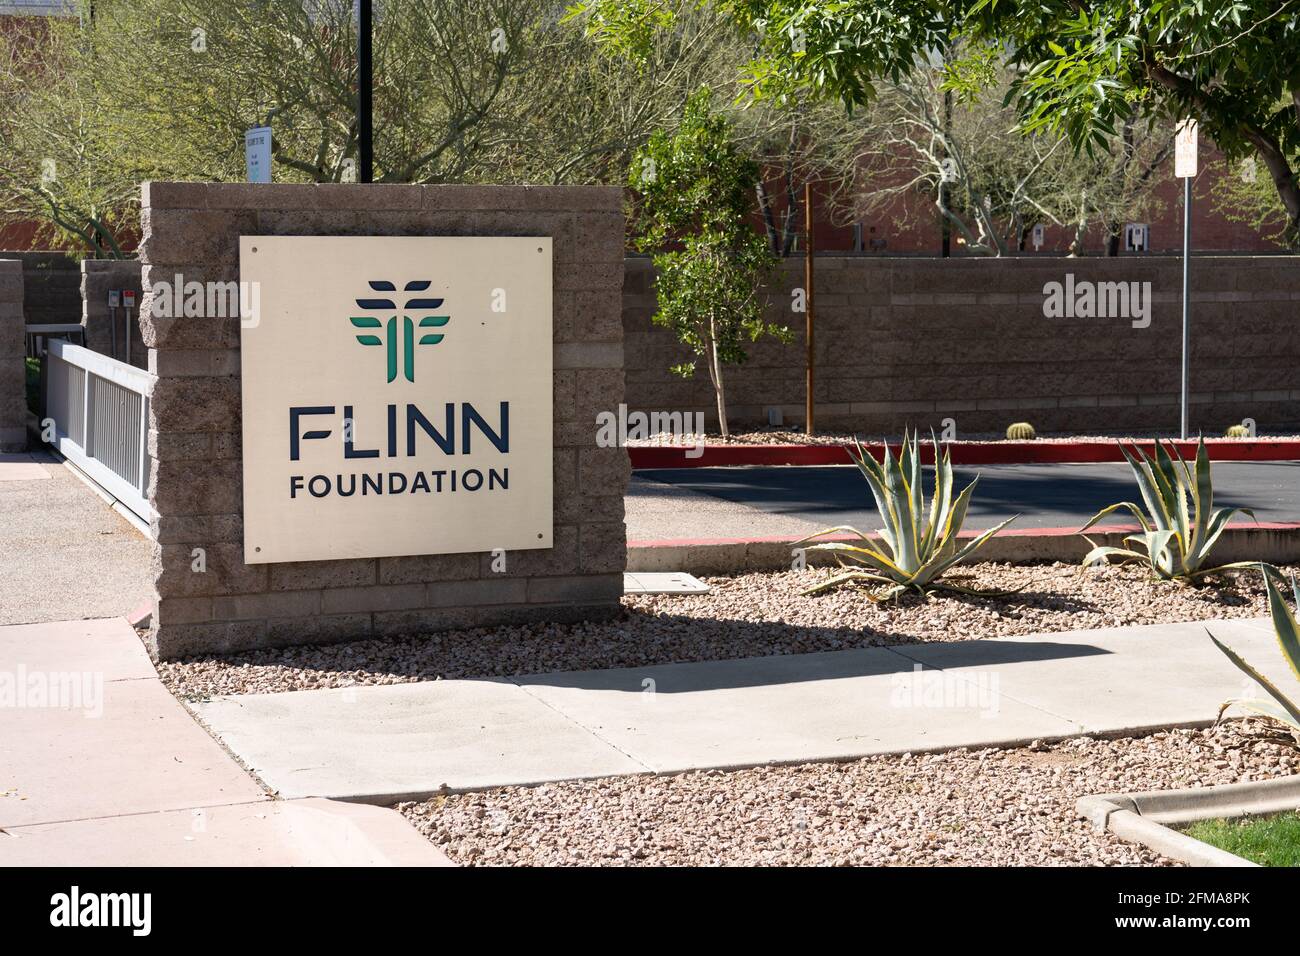 Phoenix, AZ - March 20, 2021: The Flinn Foundation is a philanthropic organization whose mission it is to improve the quality of life in Arizona to be Stock Photo